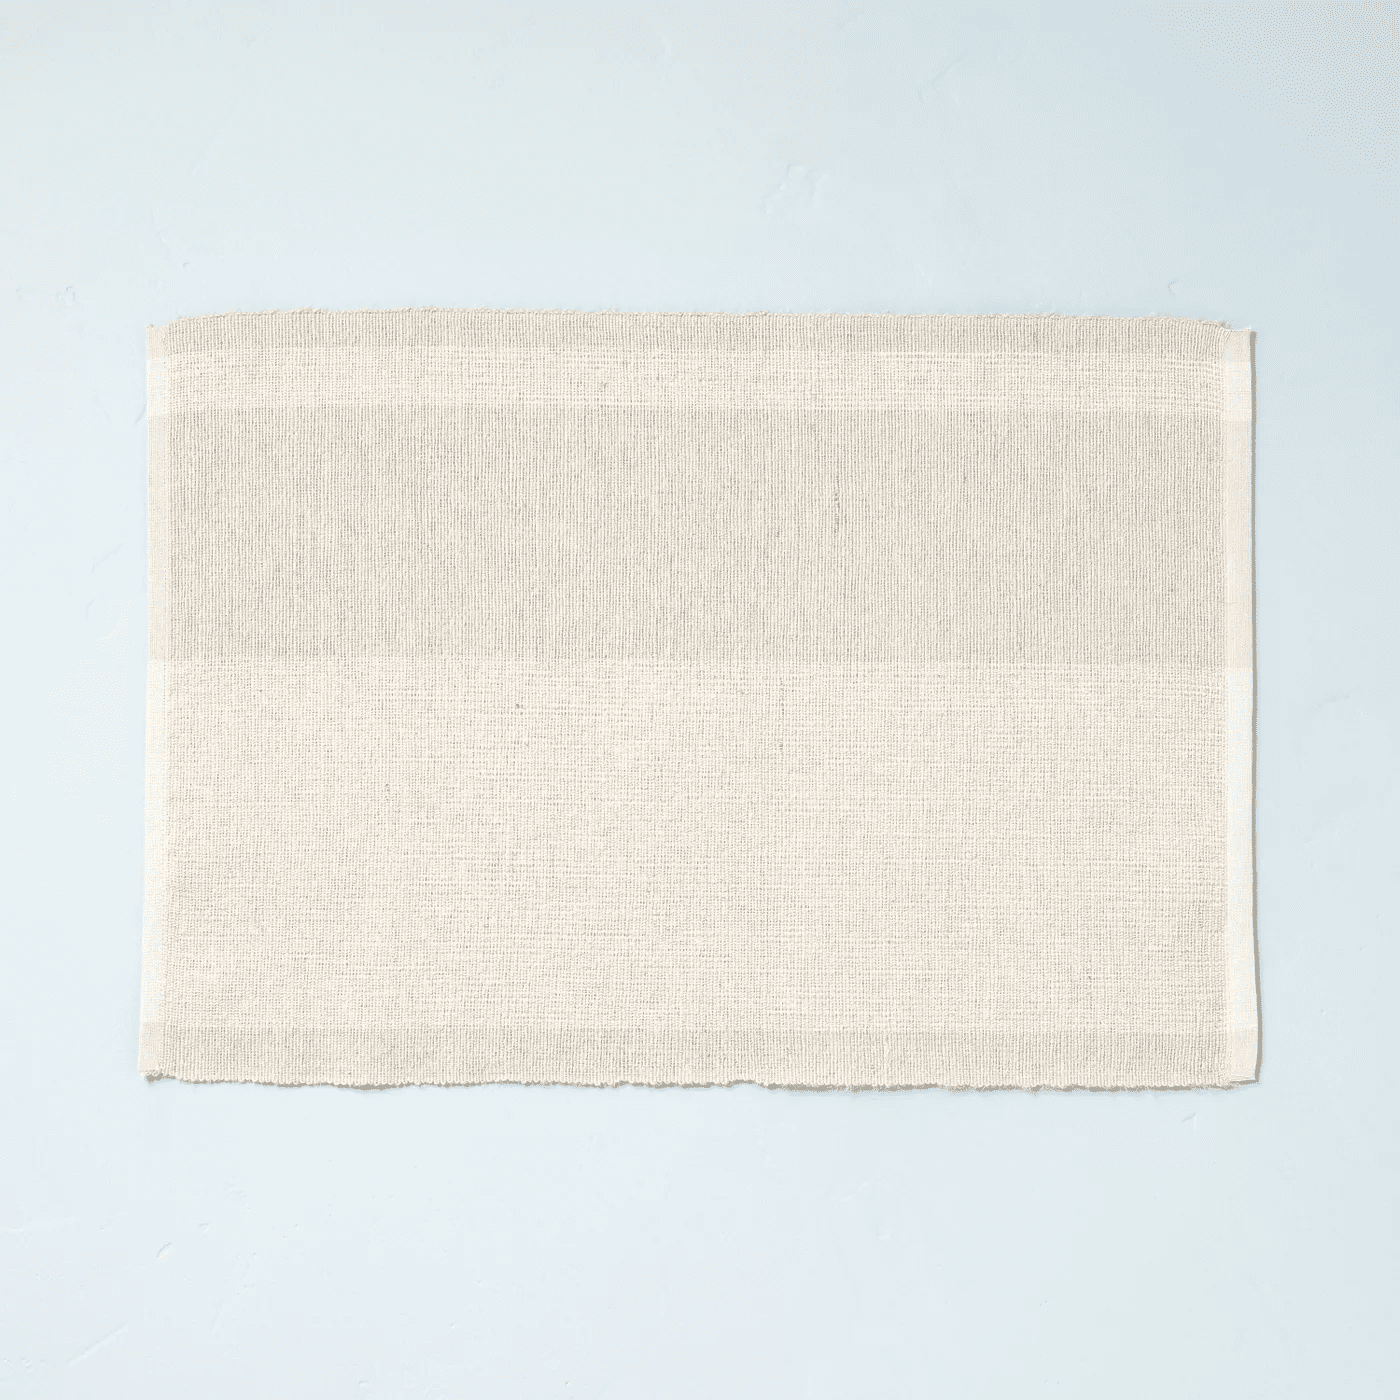 white and beige placemat on blue backdrop